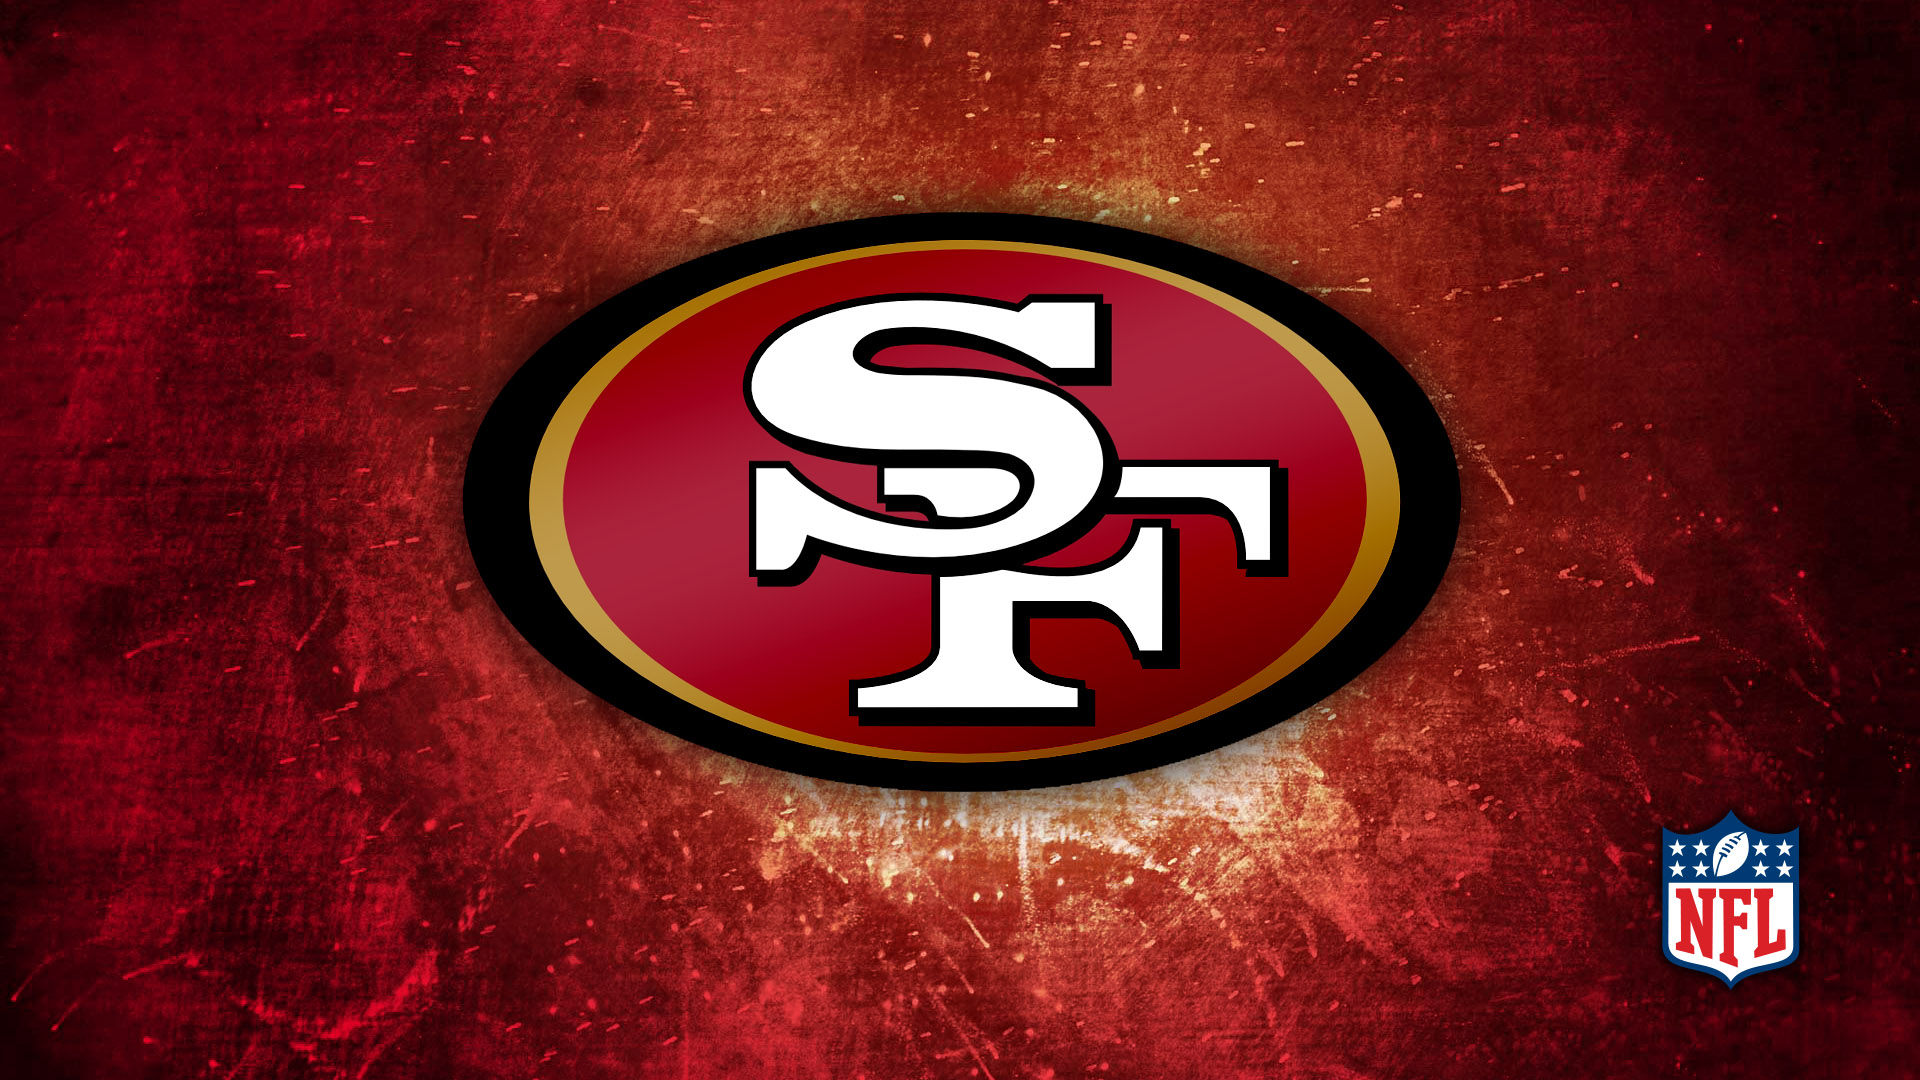 San Francisco 49ers logo background   HD Wallpapers